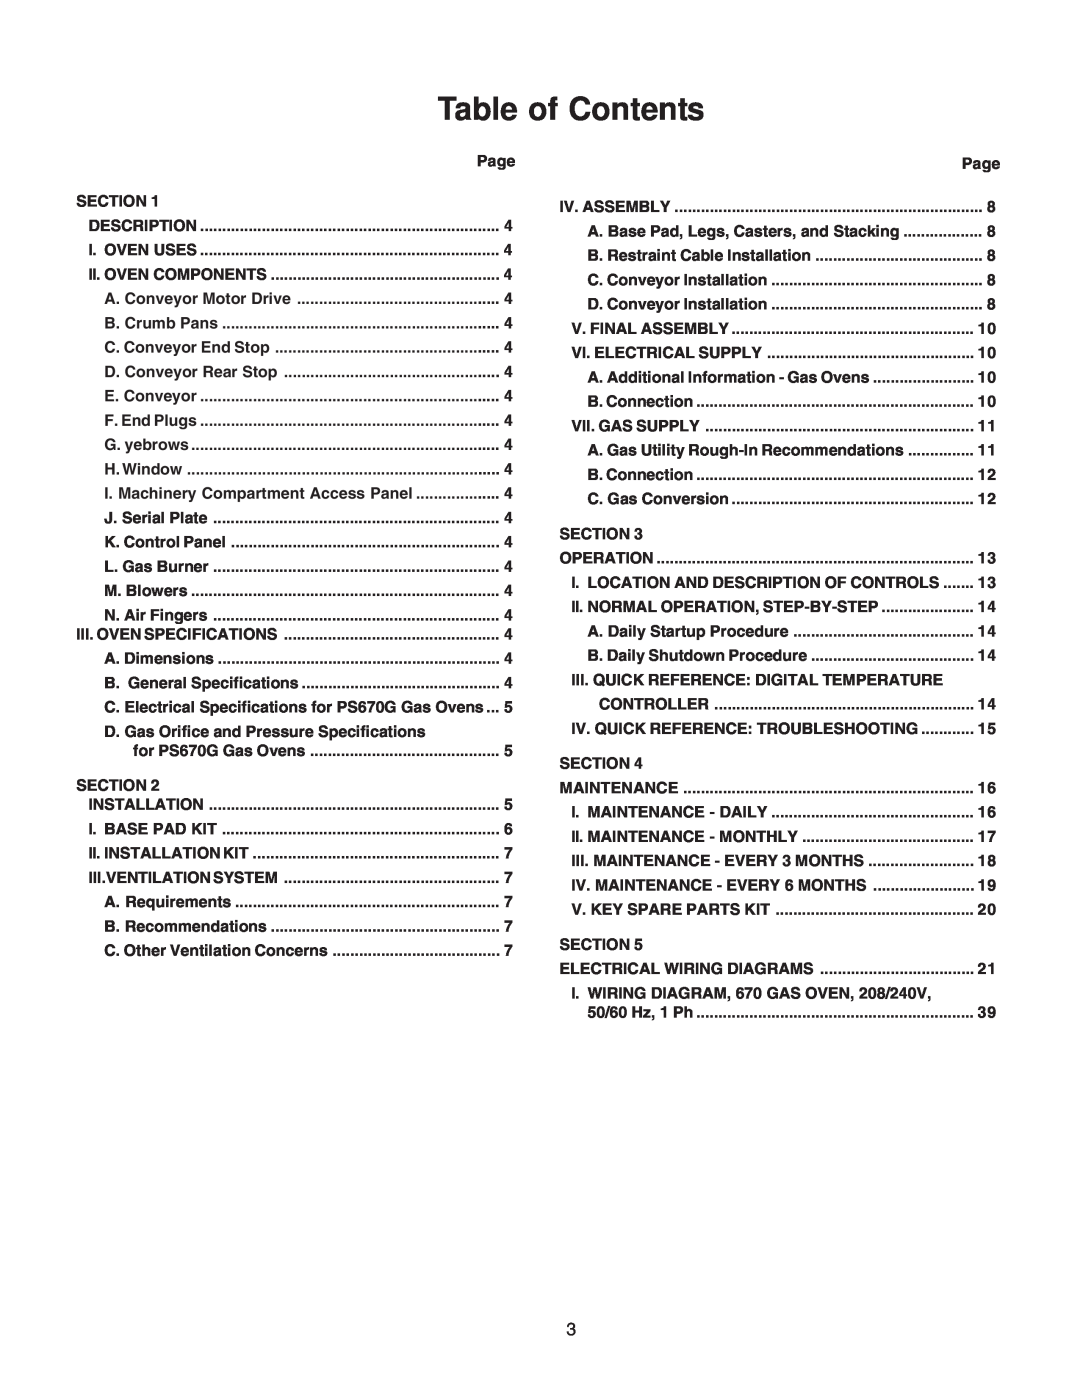 Middleby Marshall PS670 installation manual Table of Contents 